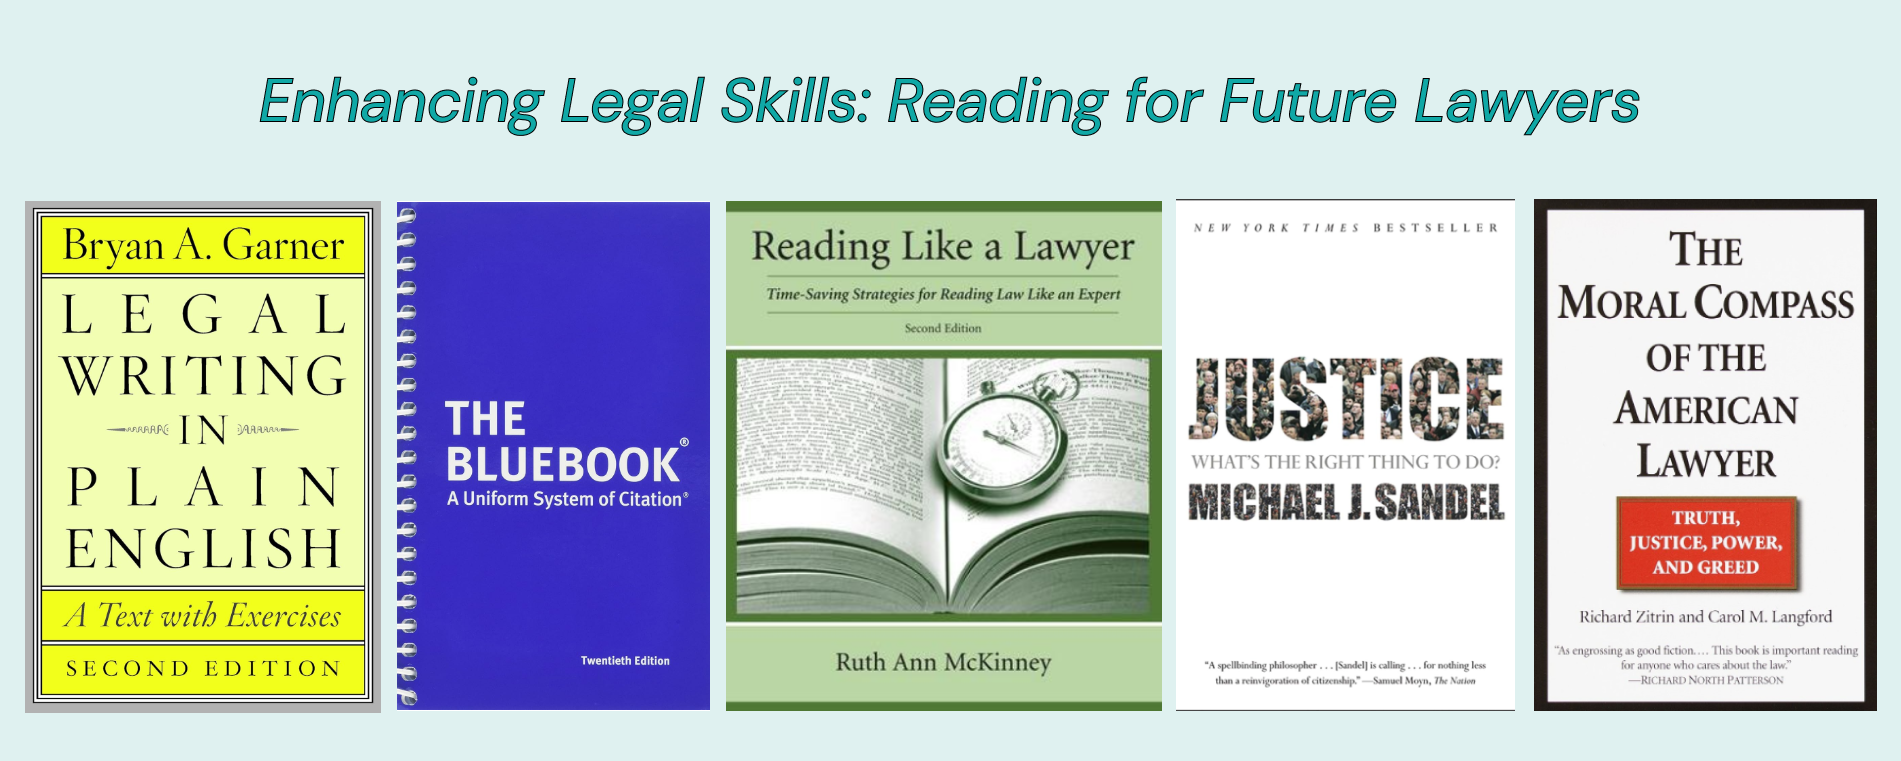 Enhancing Legal Skills Reading for Future Lawyers